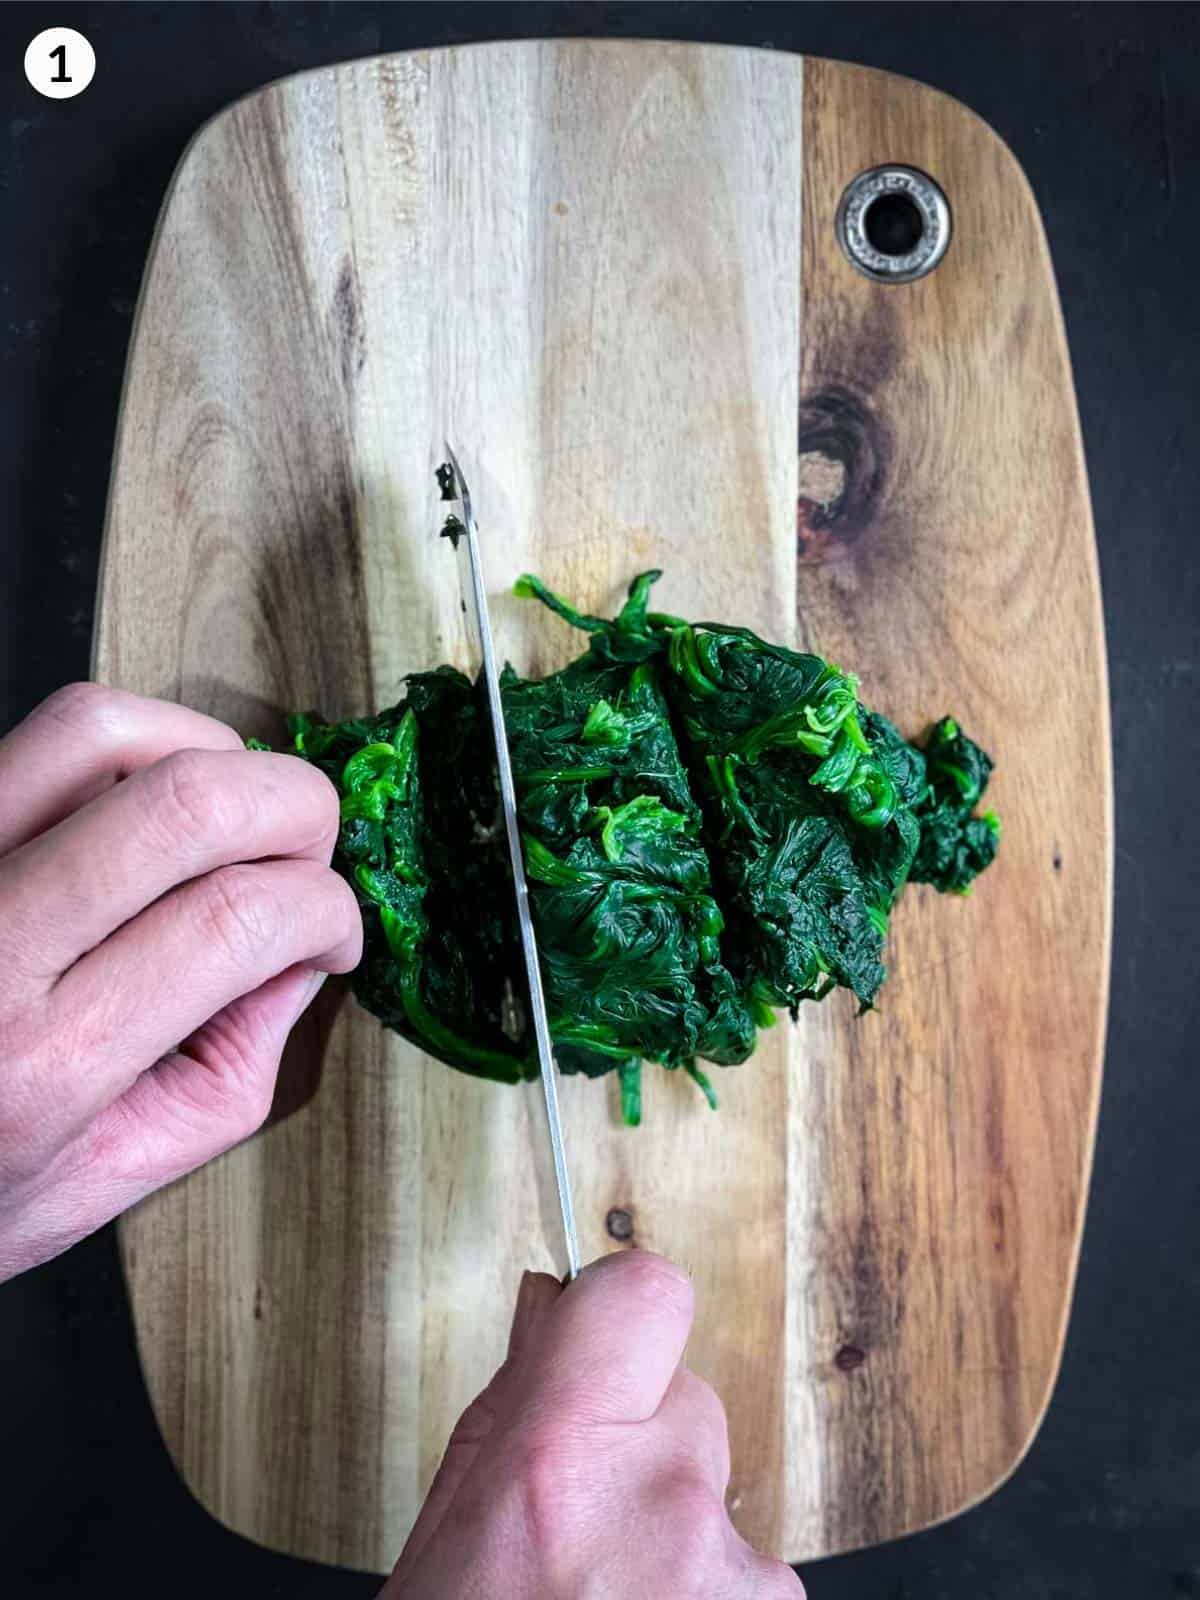 Chopping cooked Kkorean spinach with a knife on a wooden chopping board